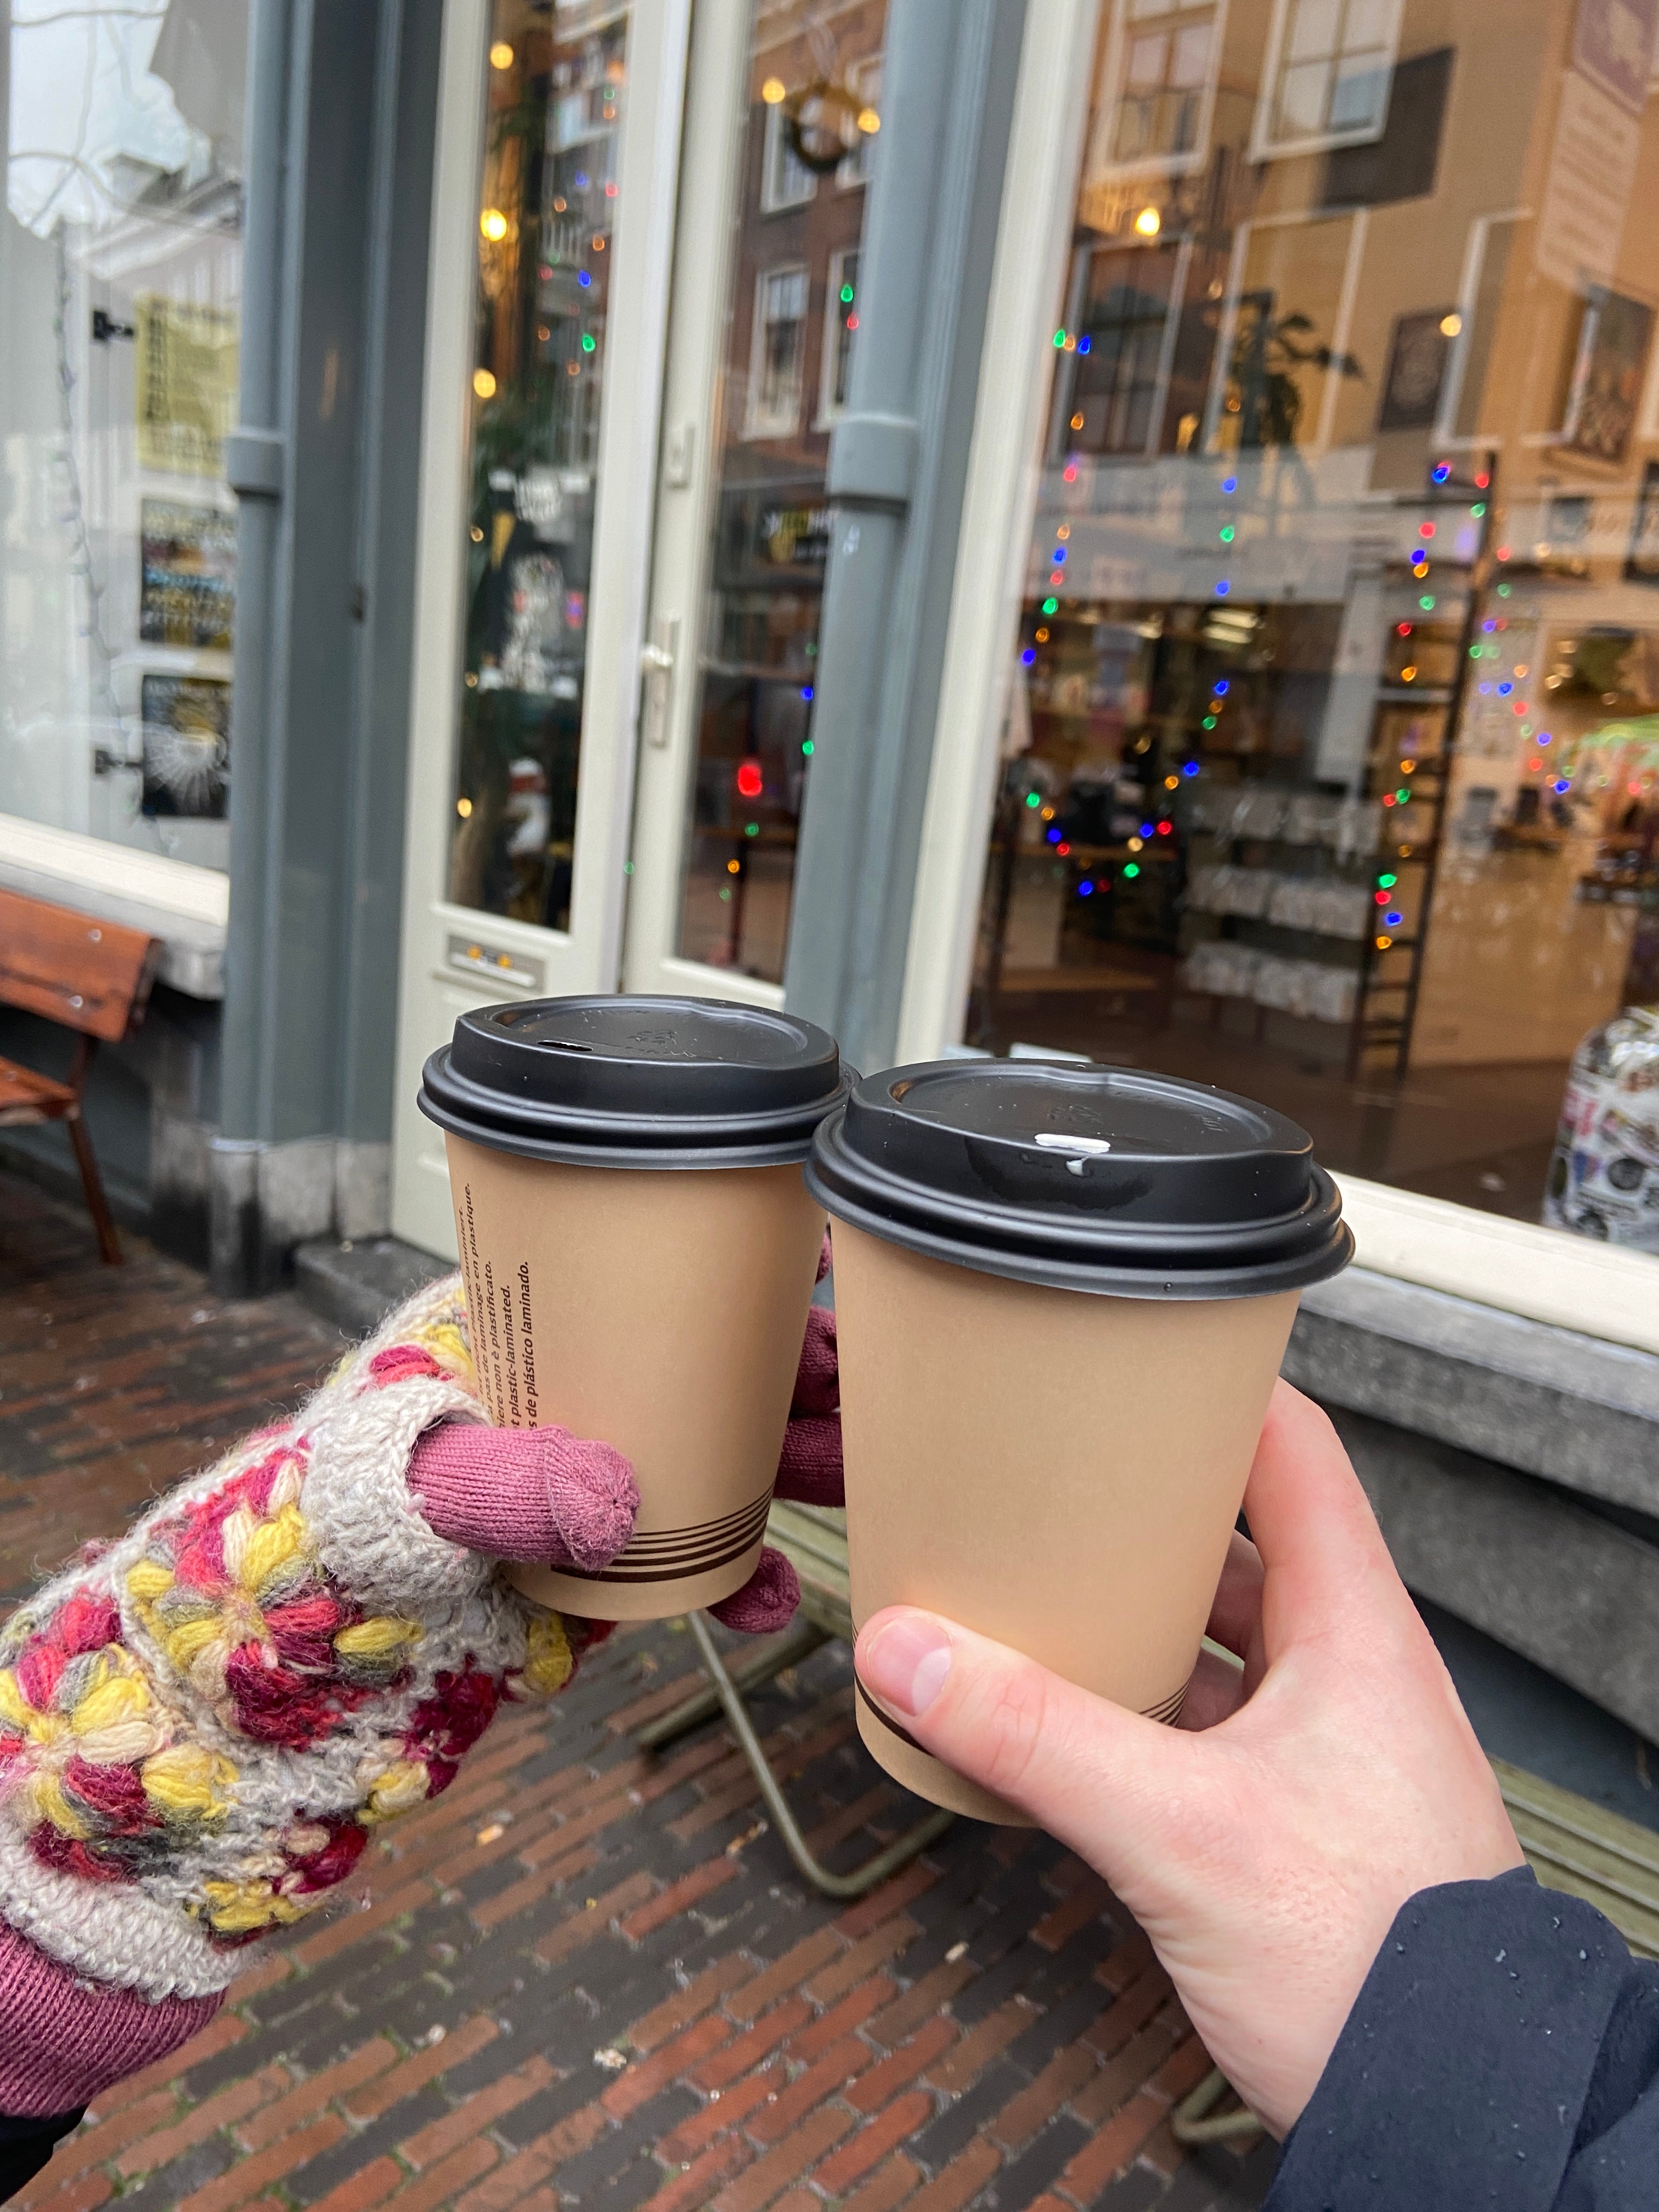 Coffee cups doing a cheers outside during Christmas in Amsterdam